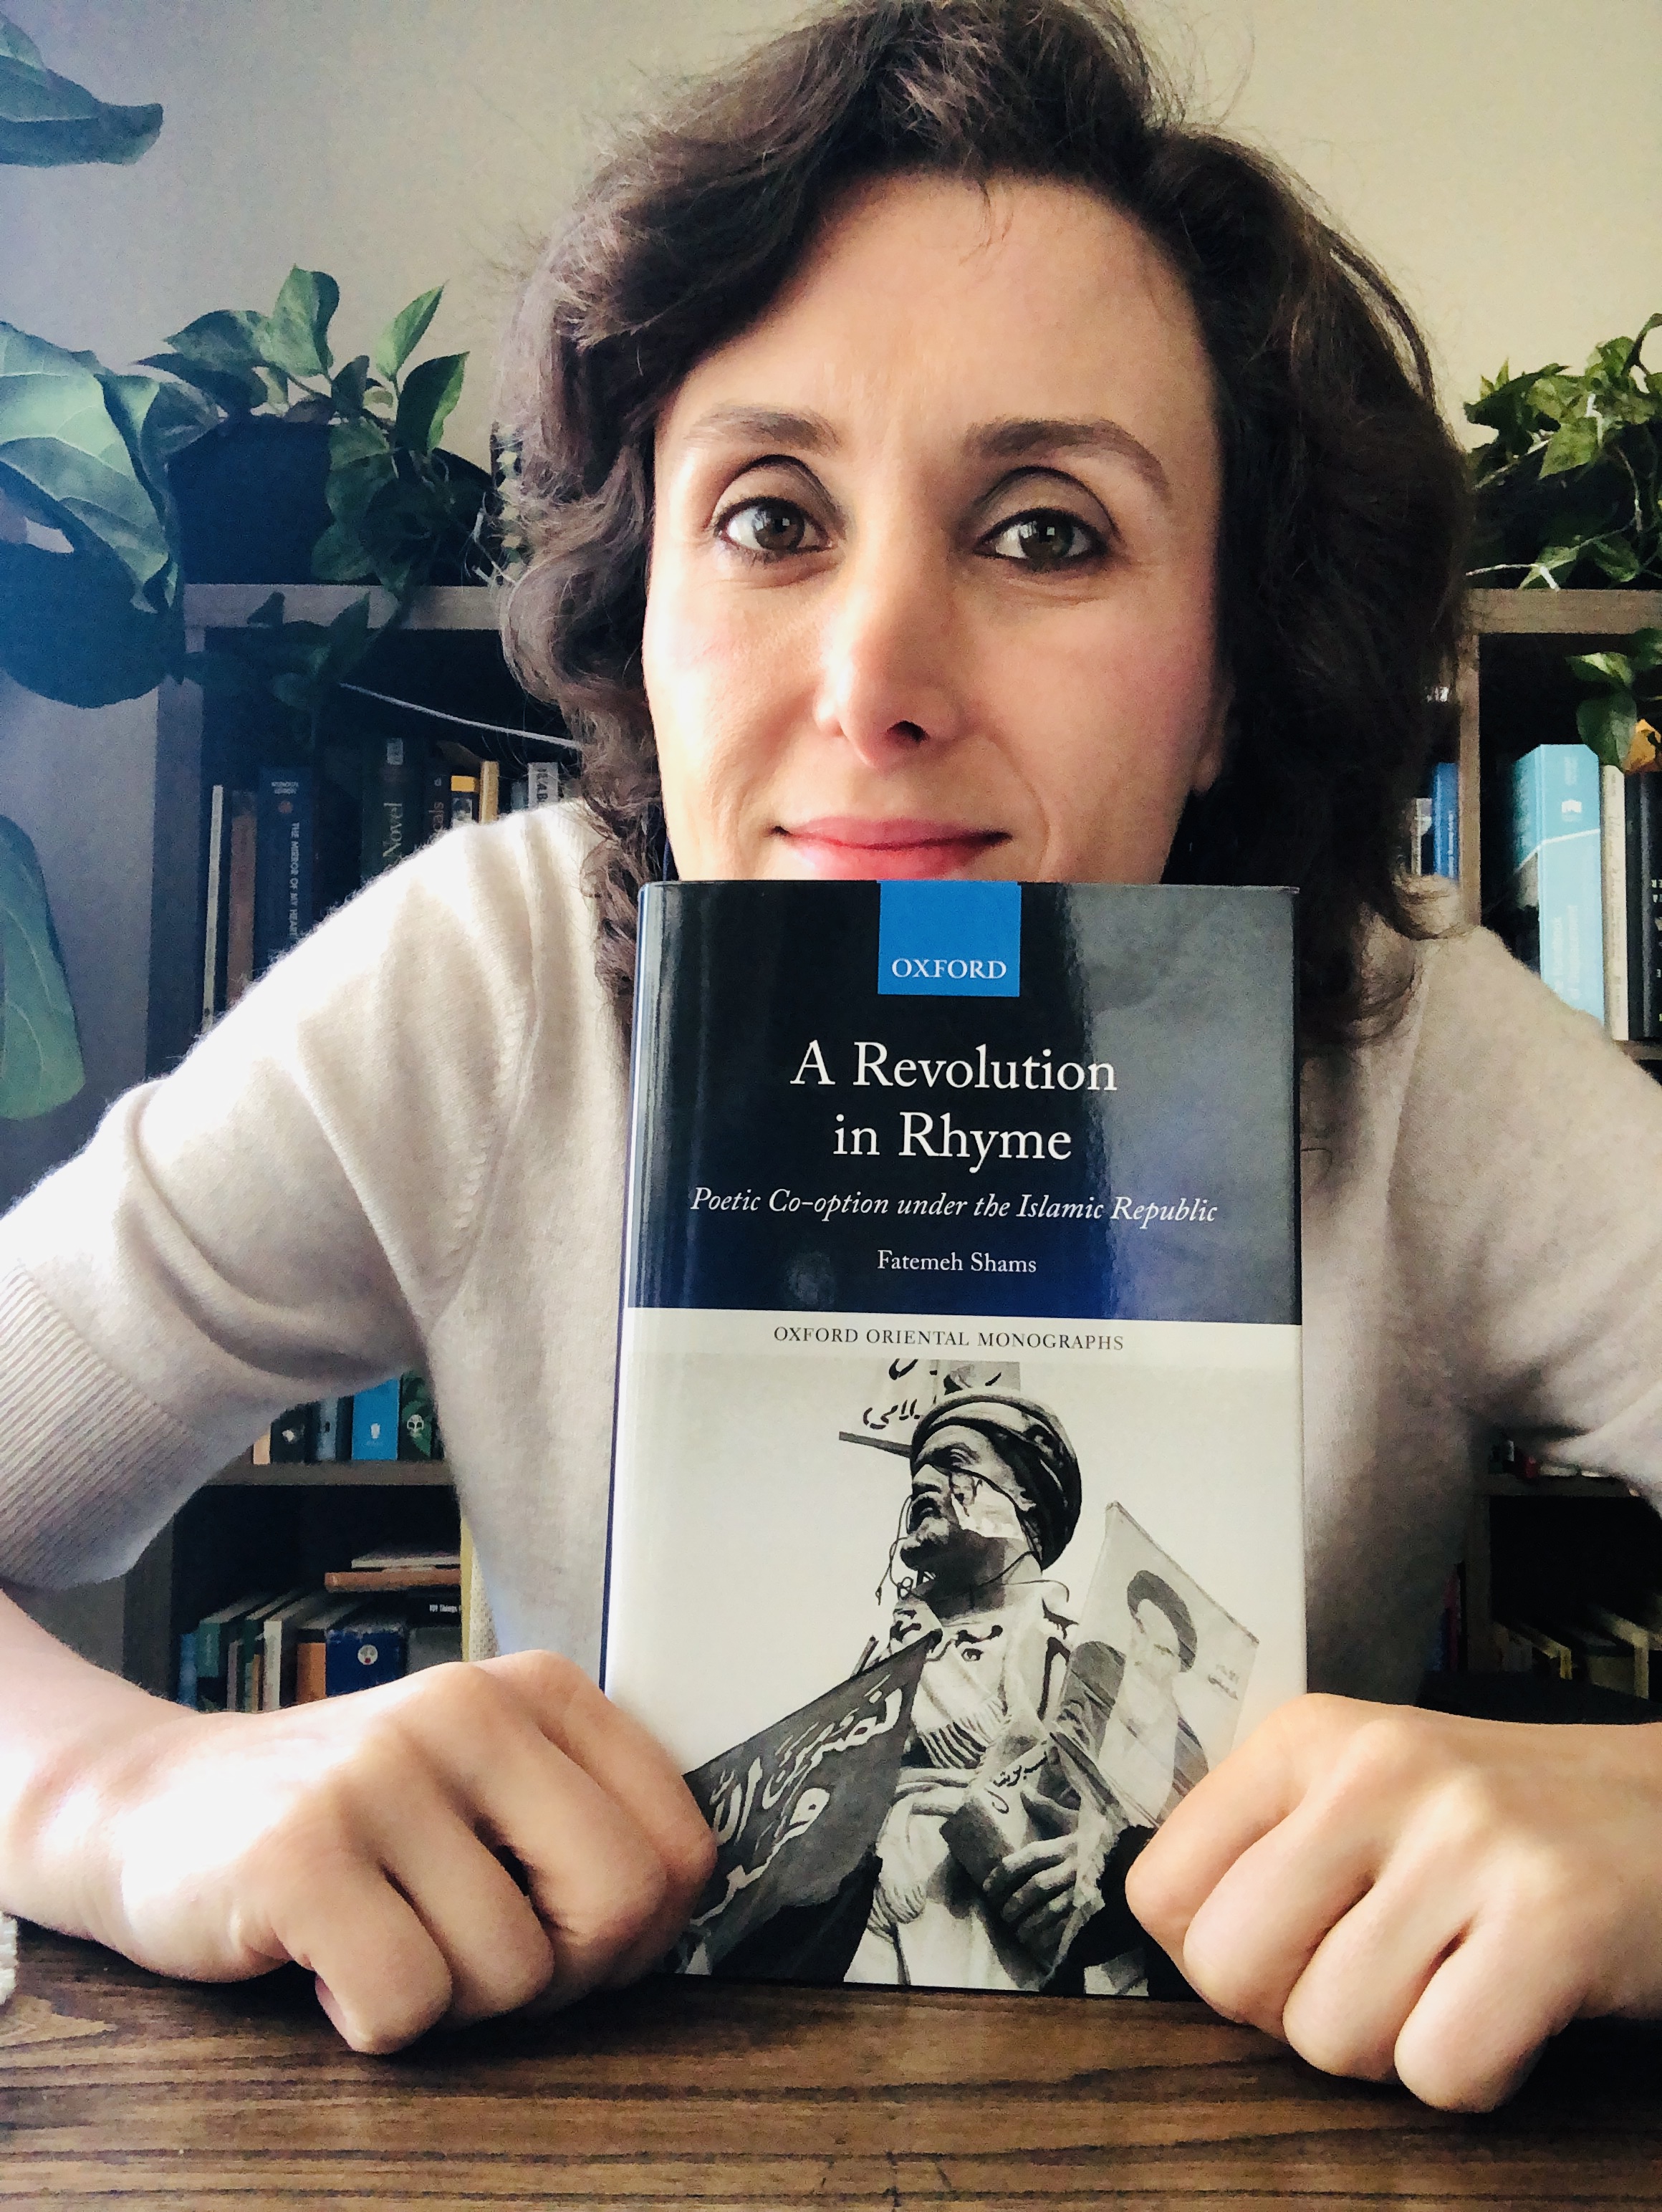 Professor holding book A Revolution in Rhyme